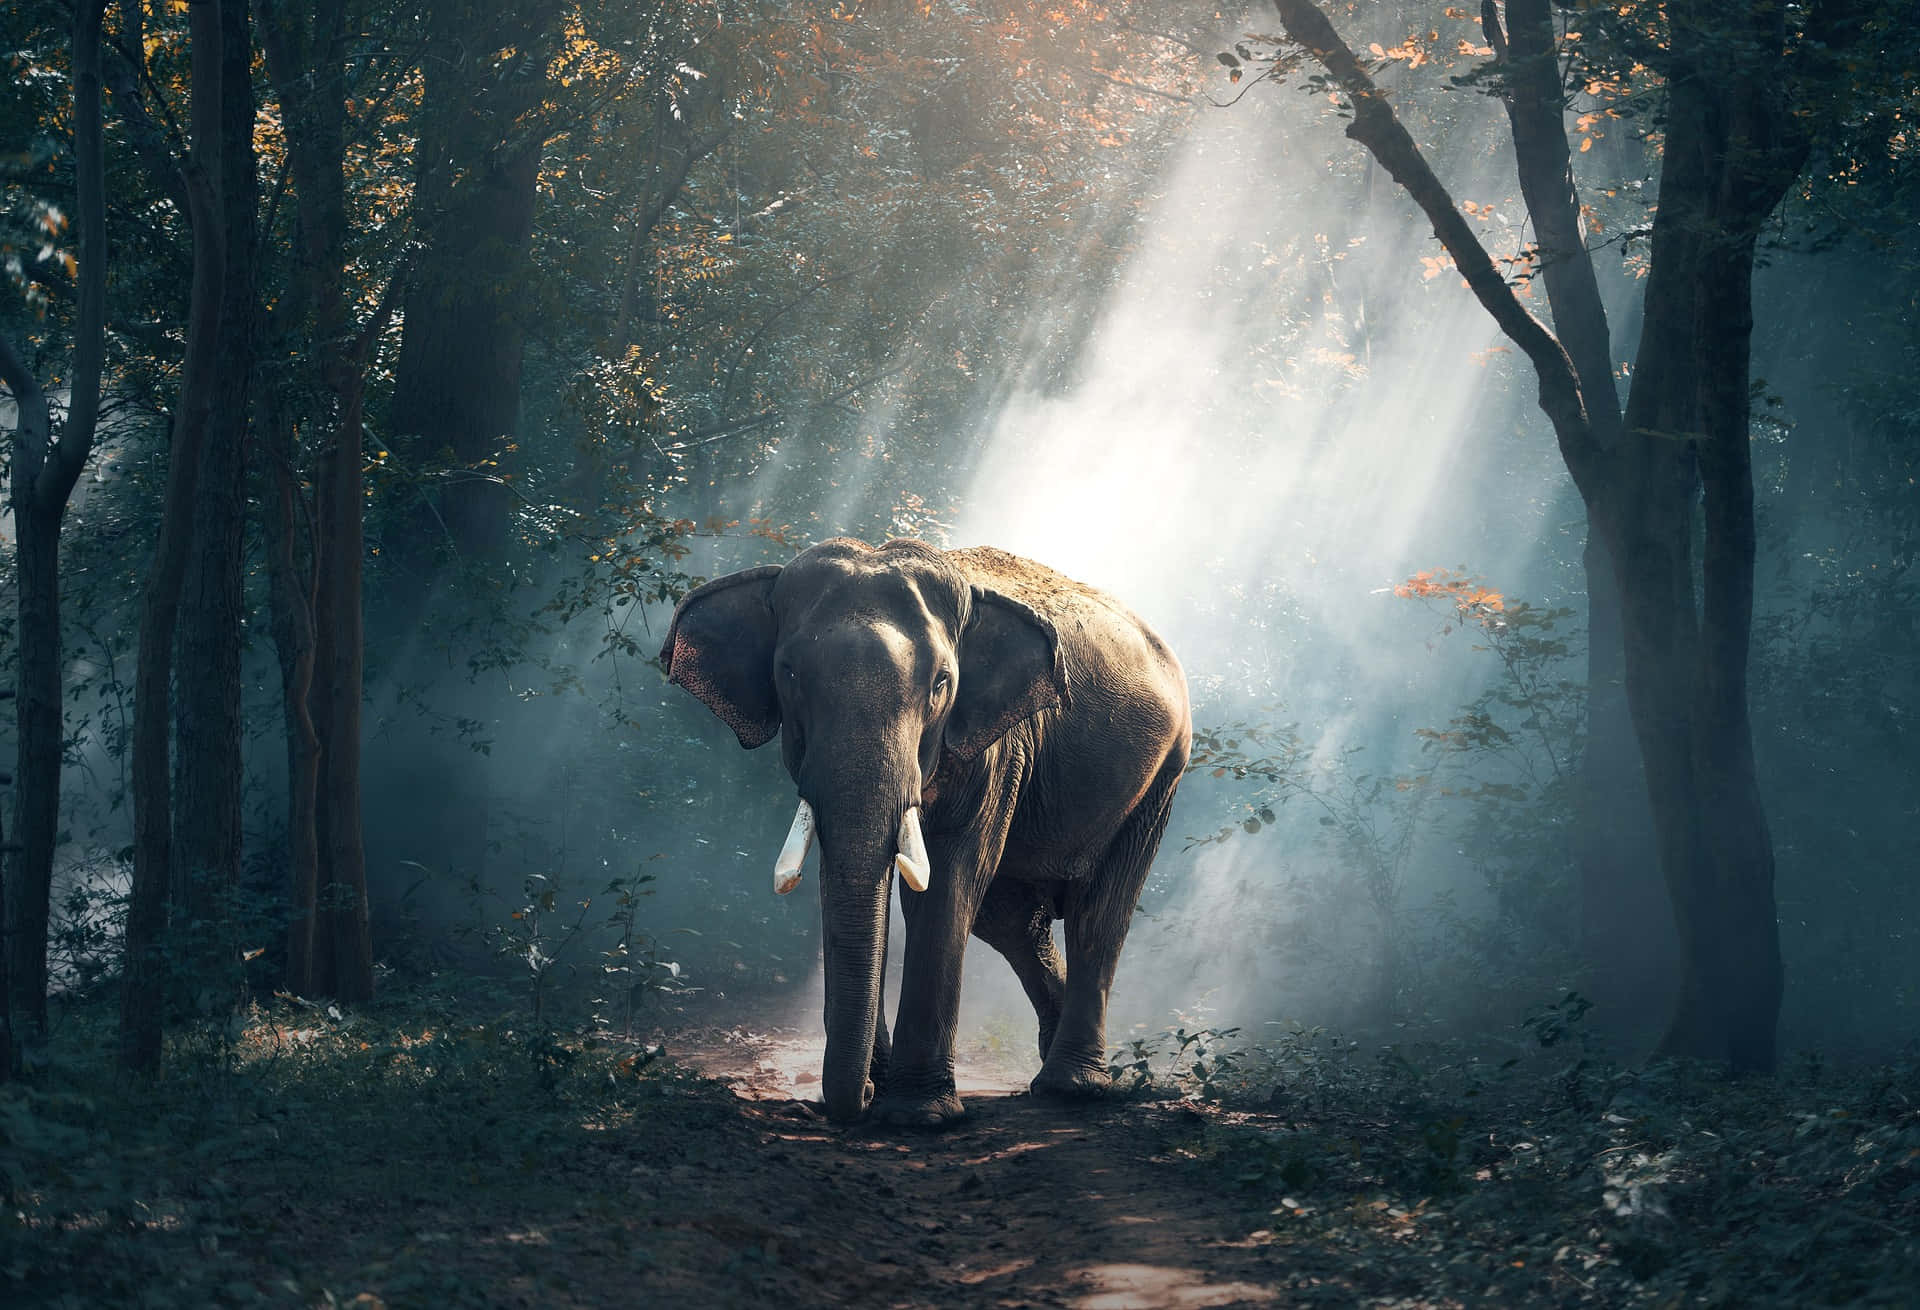 Elephant In The Beautiful Forest Picture